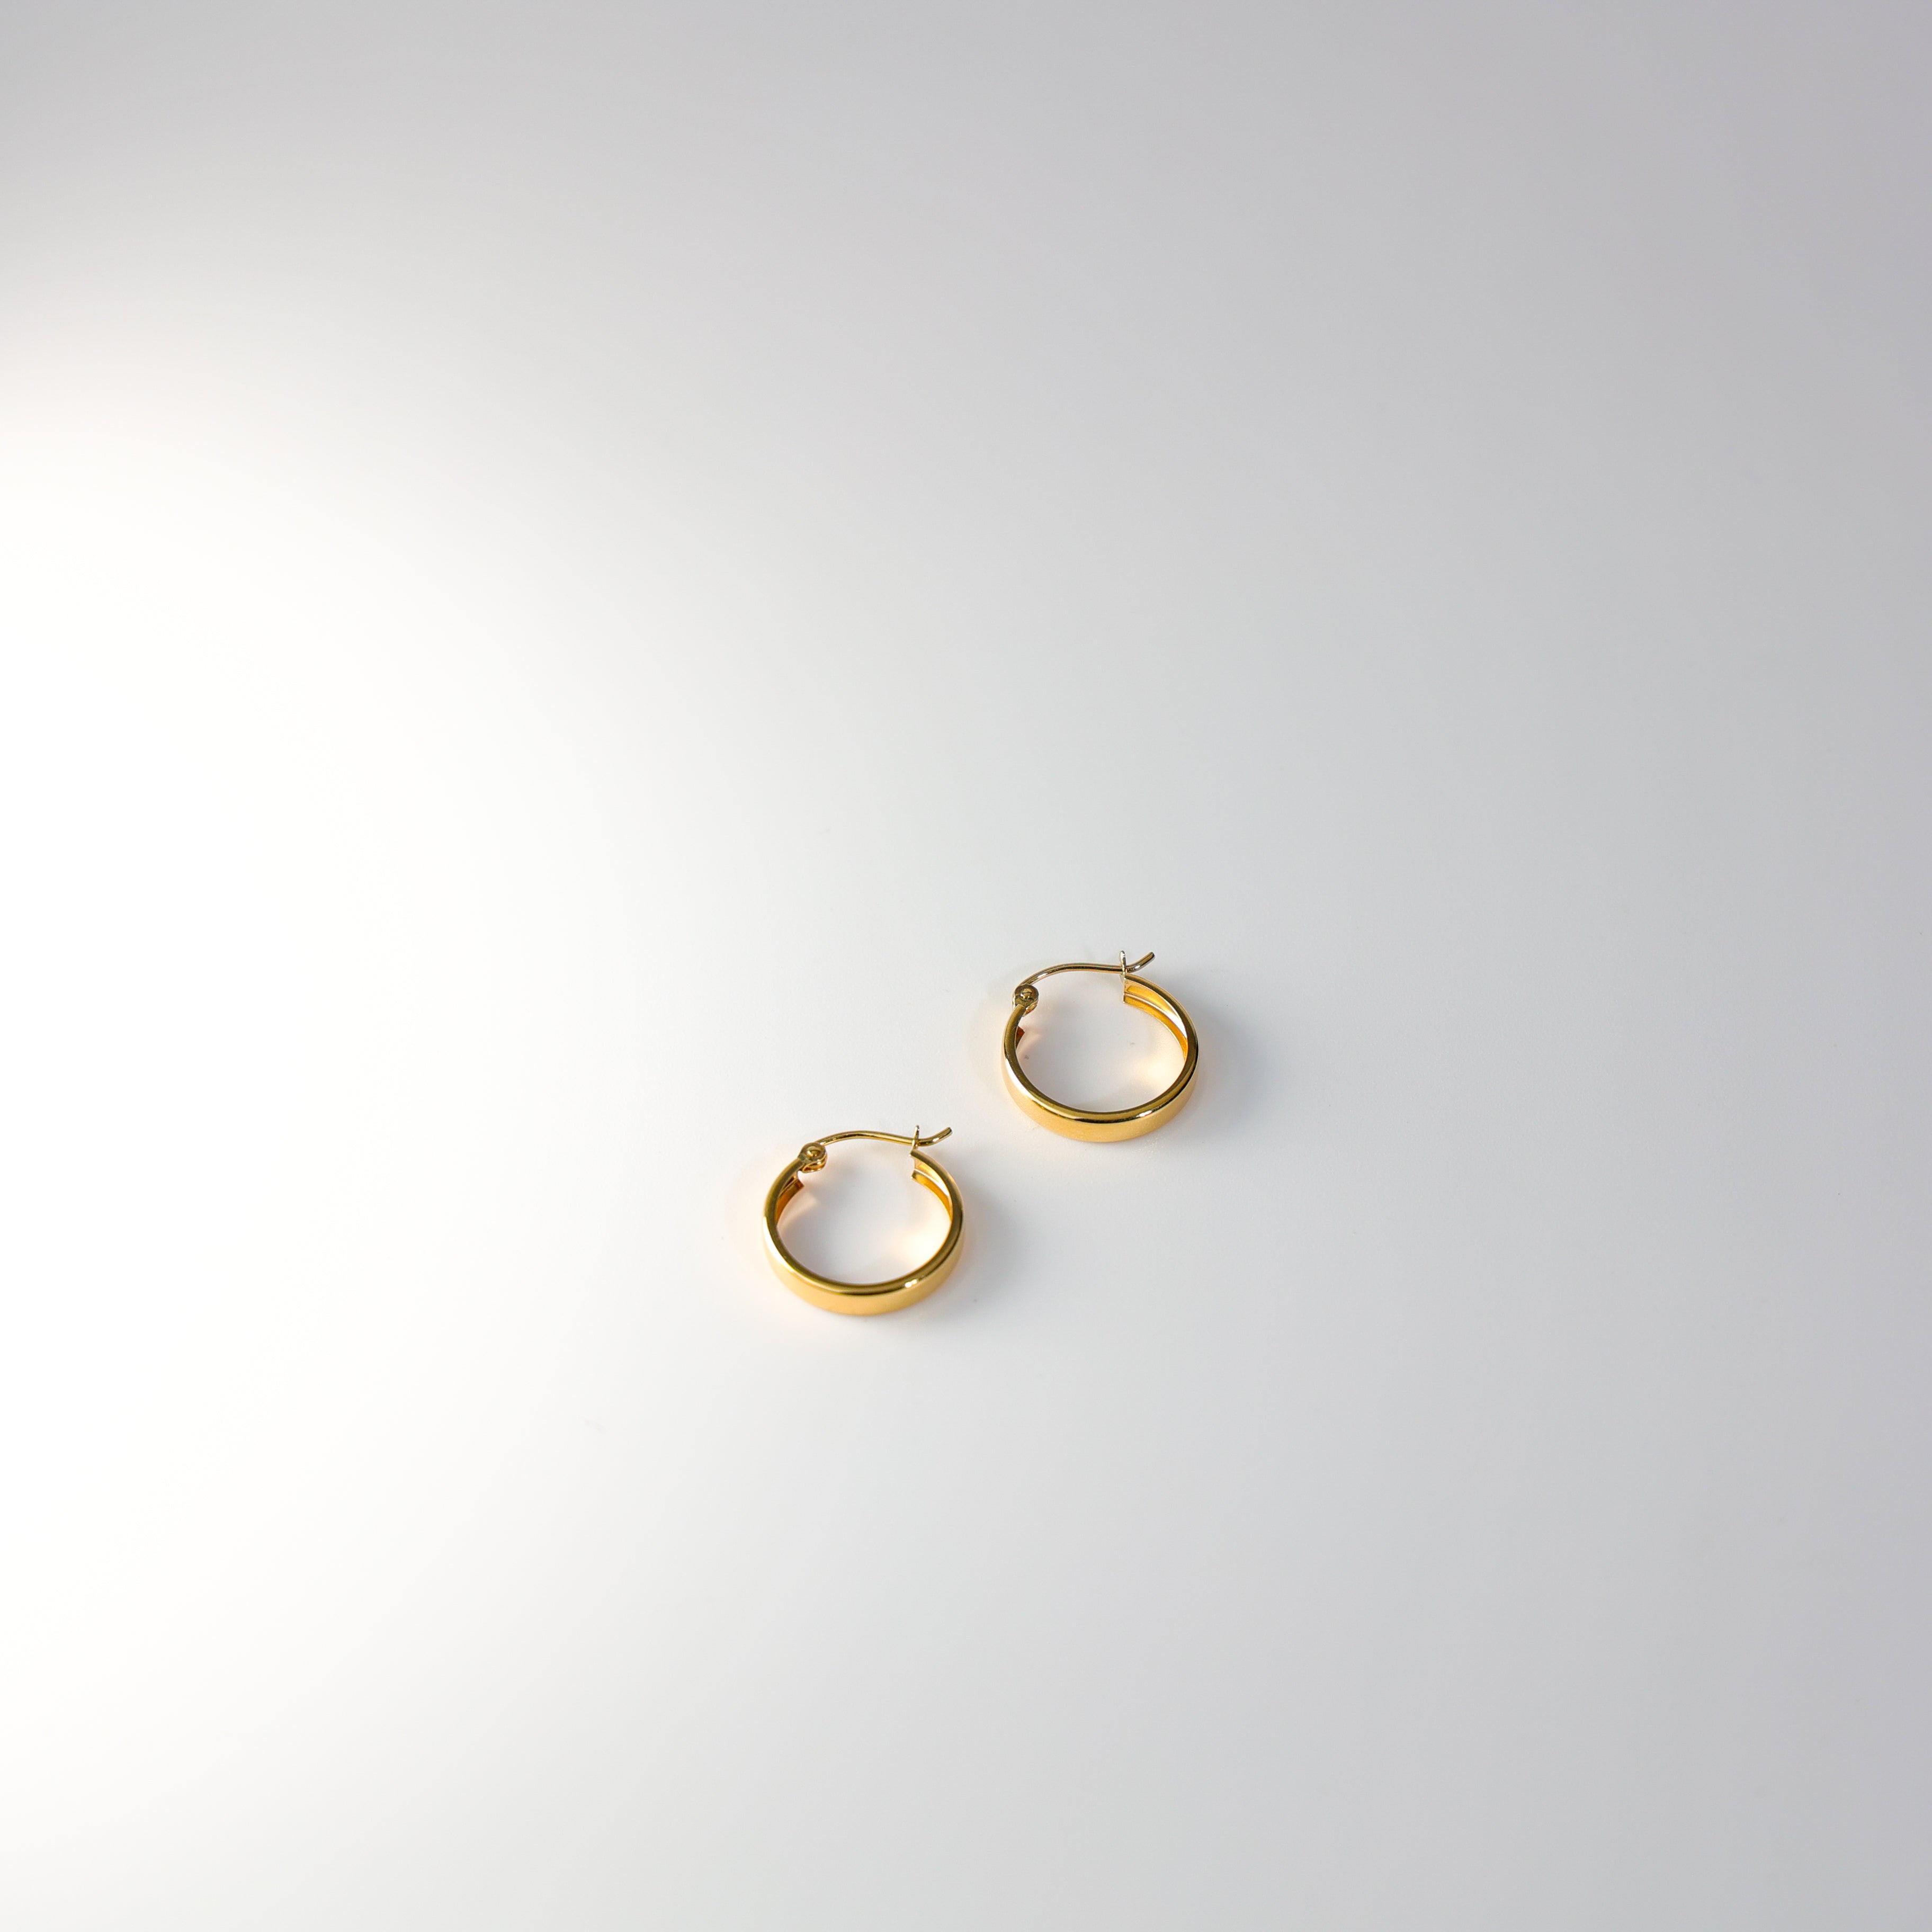 Beauty Standards Gold Hoop Earrings - 3 MM Thickness - Charlie & Co. Jewelry